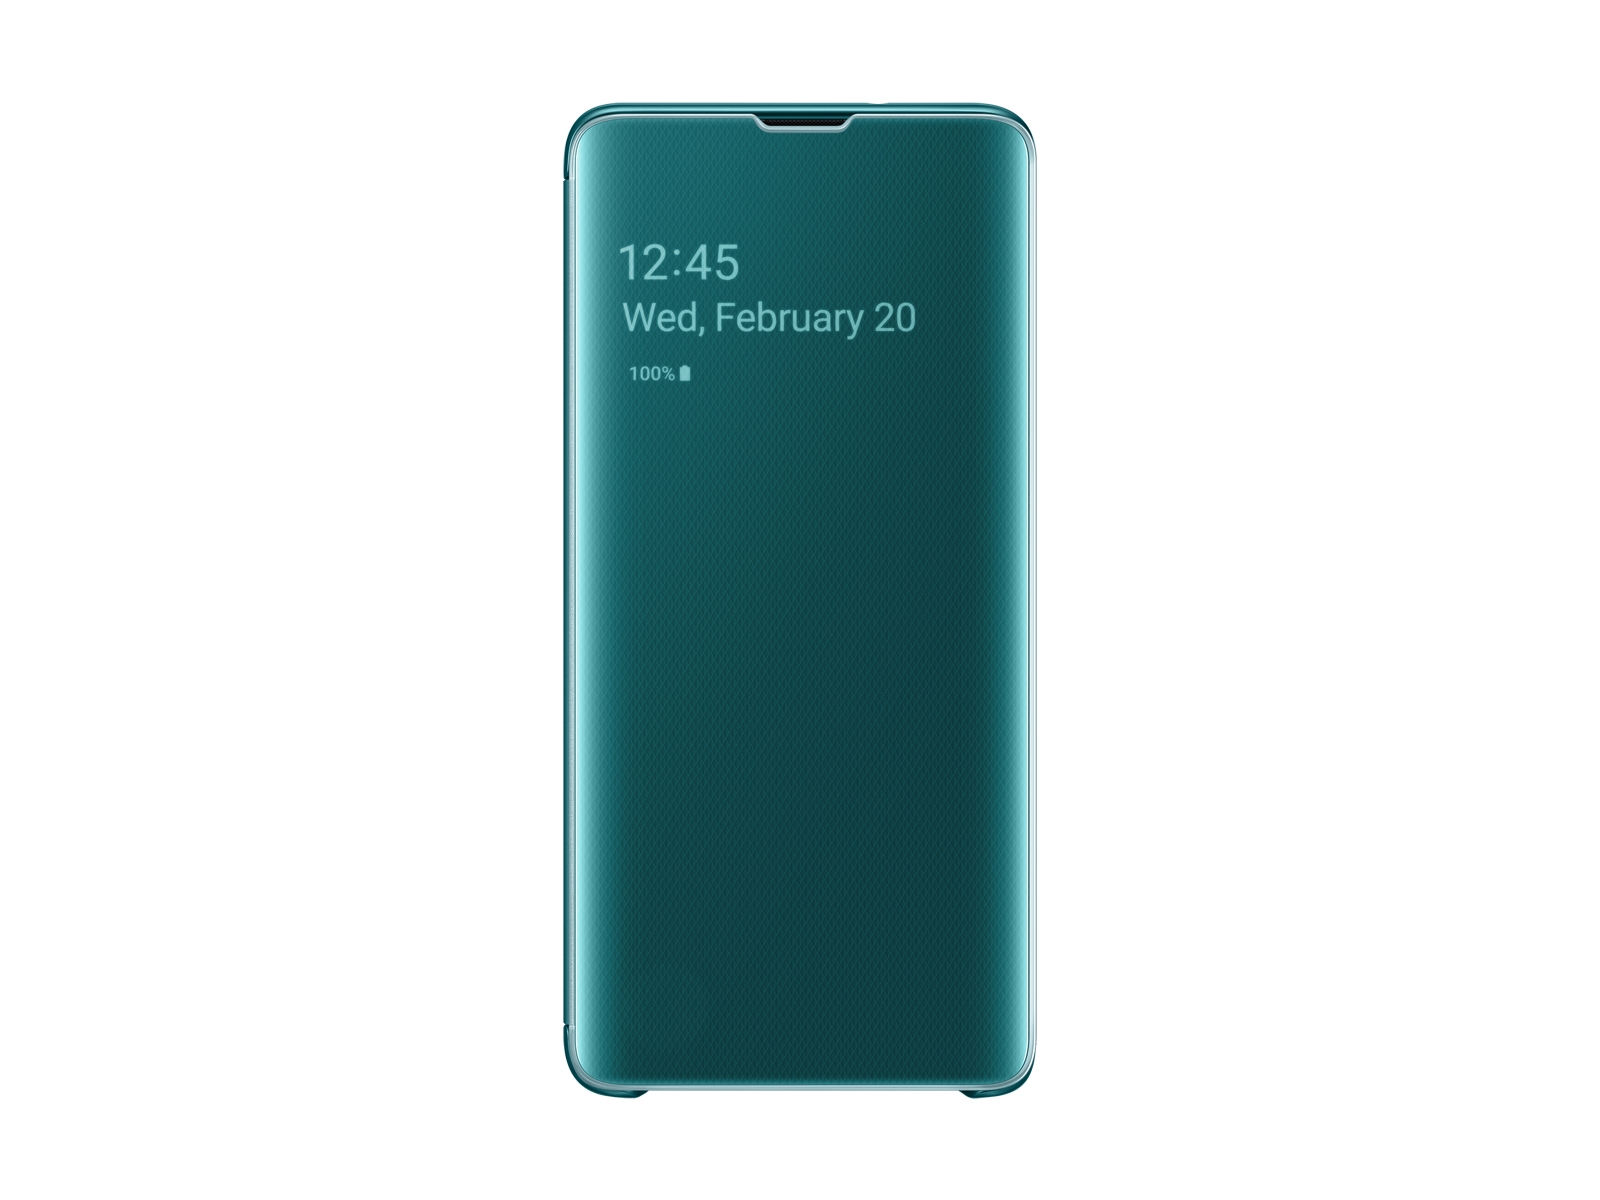 Malaise Huisje ethisch Galaxy S10 S-View Flip Cover, Green Mobile Accessories - EF-ZG973CGEGUS |  Samsung US